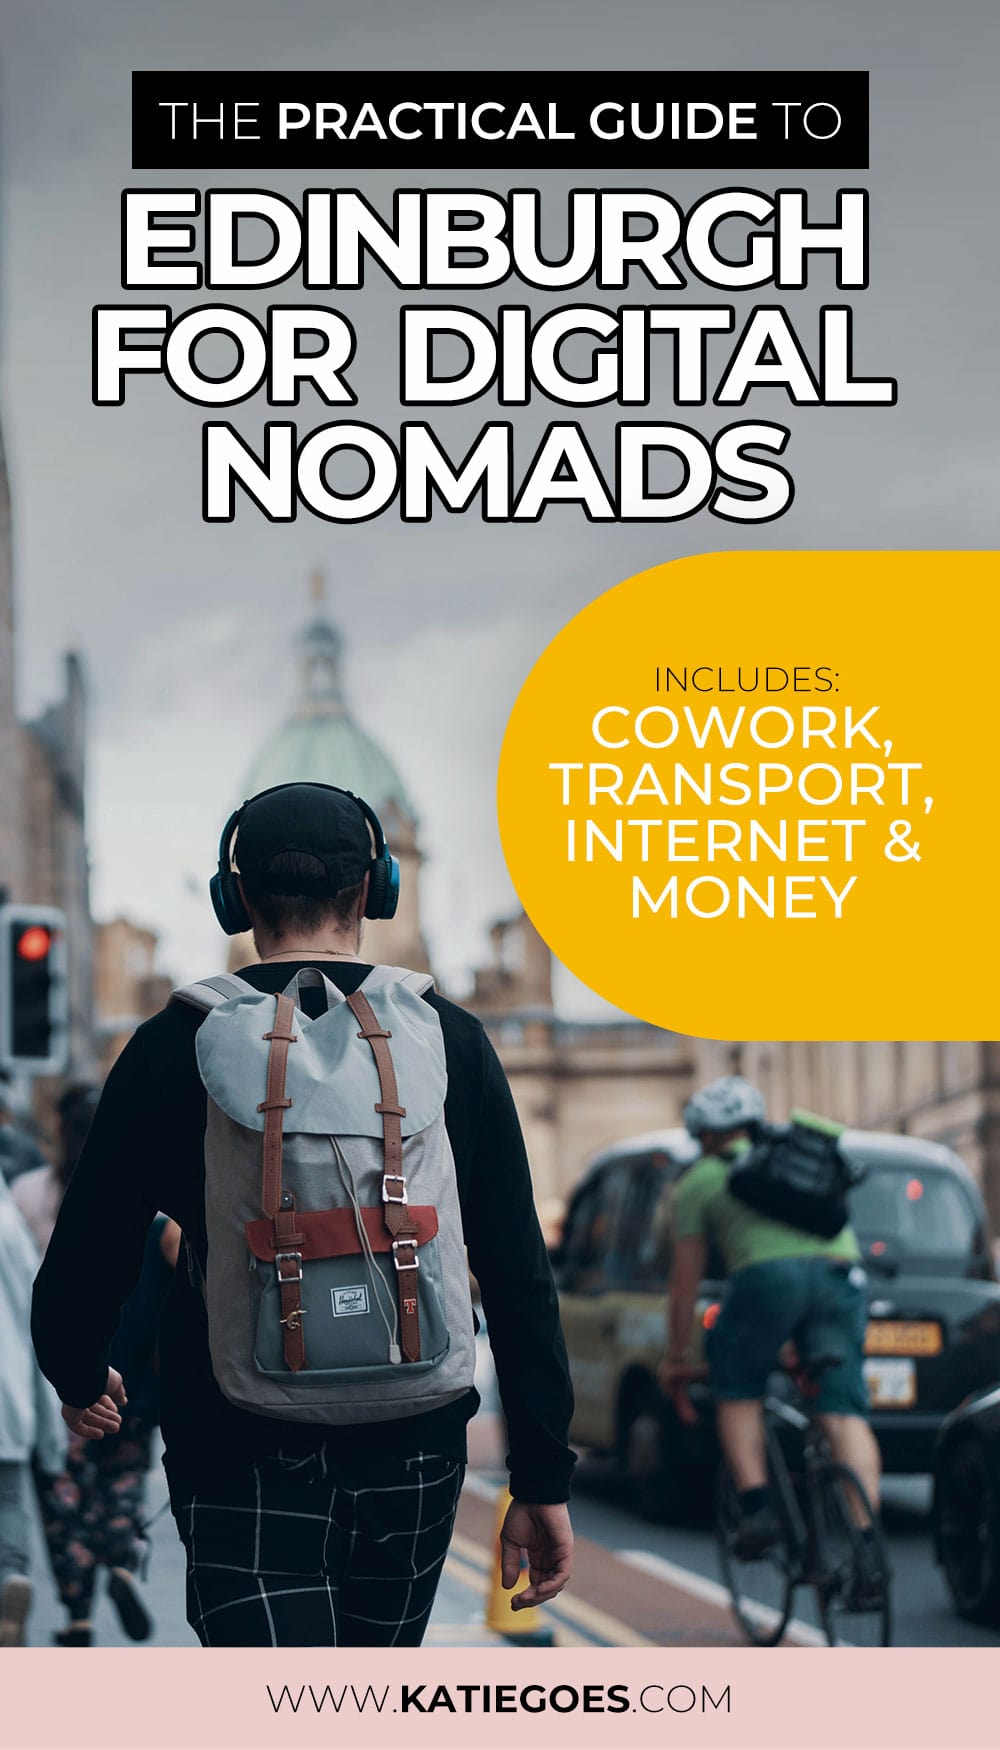 The Practical Guide to Edinburgh for Digital Nomads